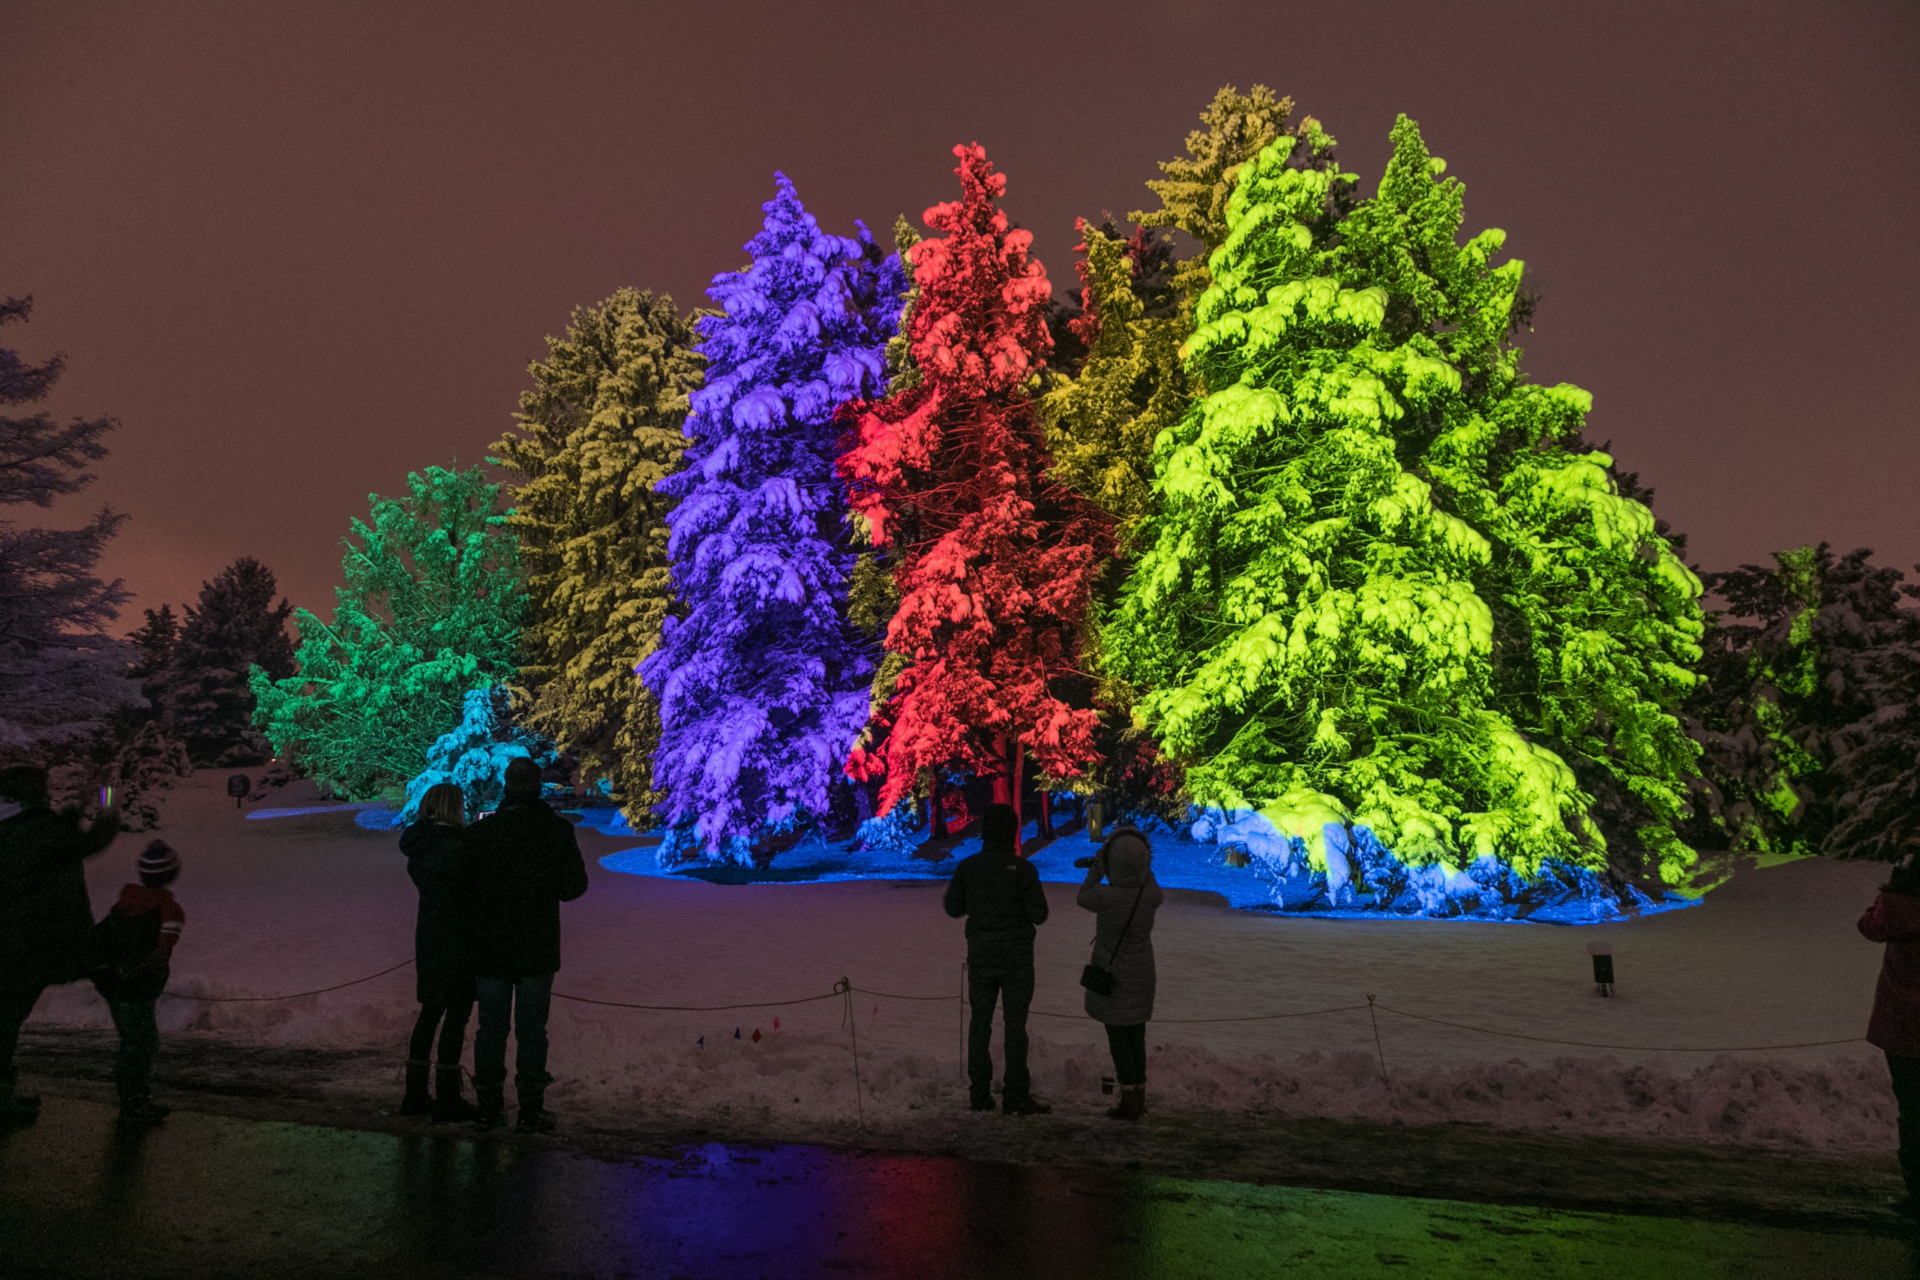 Guests at Illumination watch vivid colors change on trees